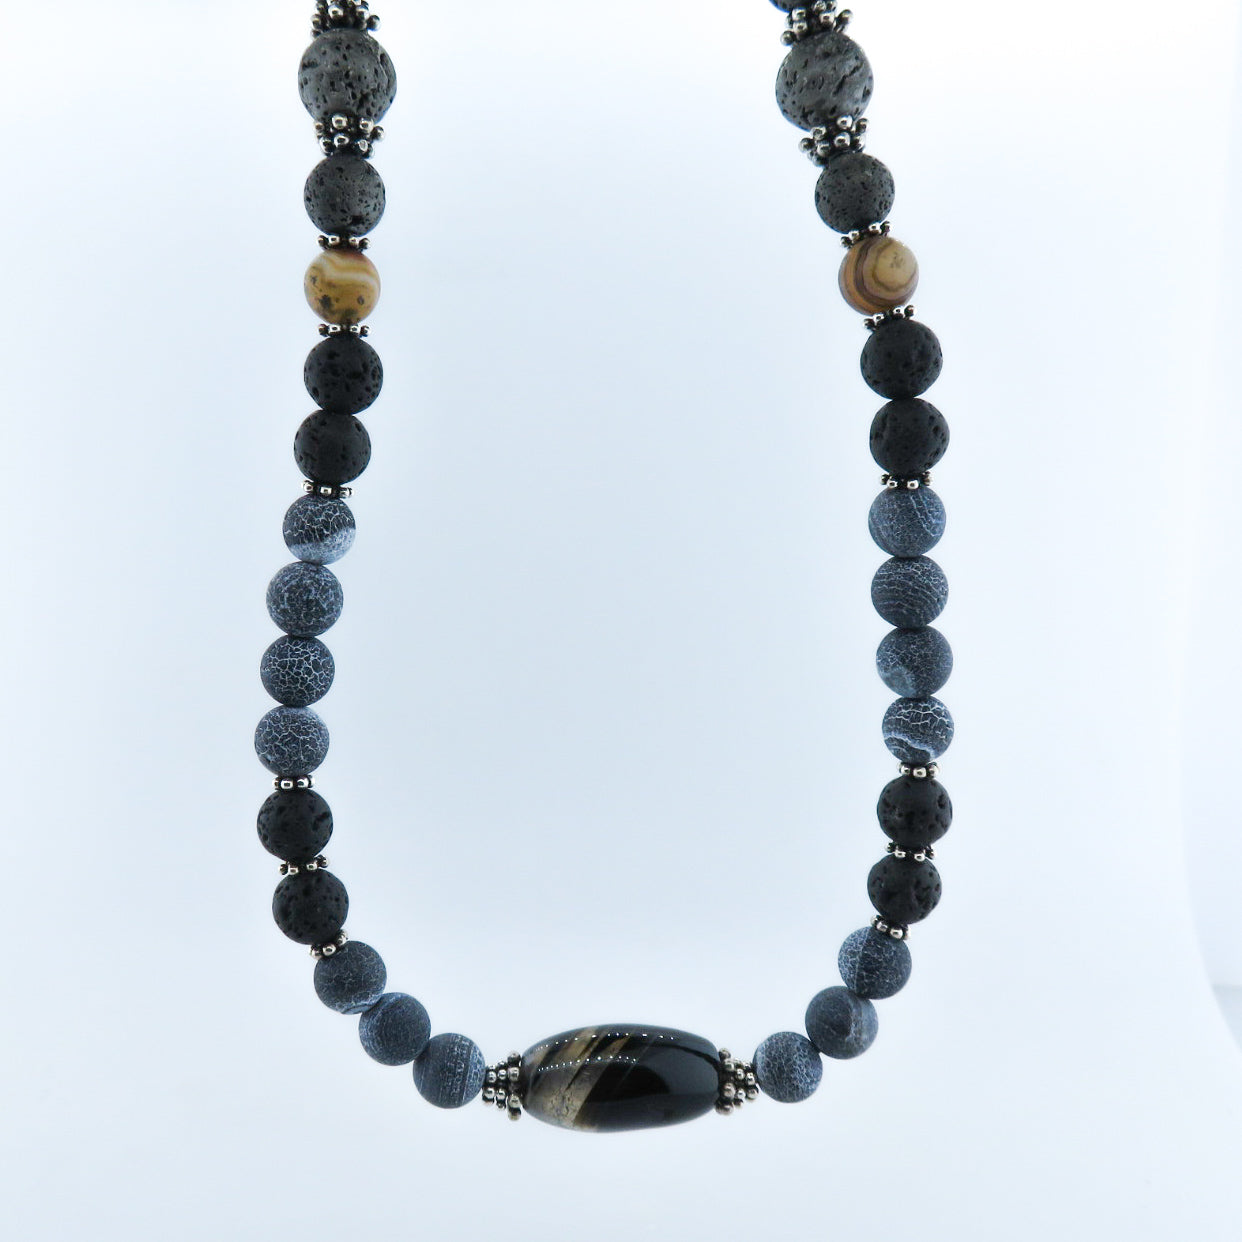 Agate Beads Necklace with Lava and Silver Beads